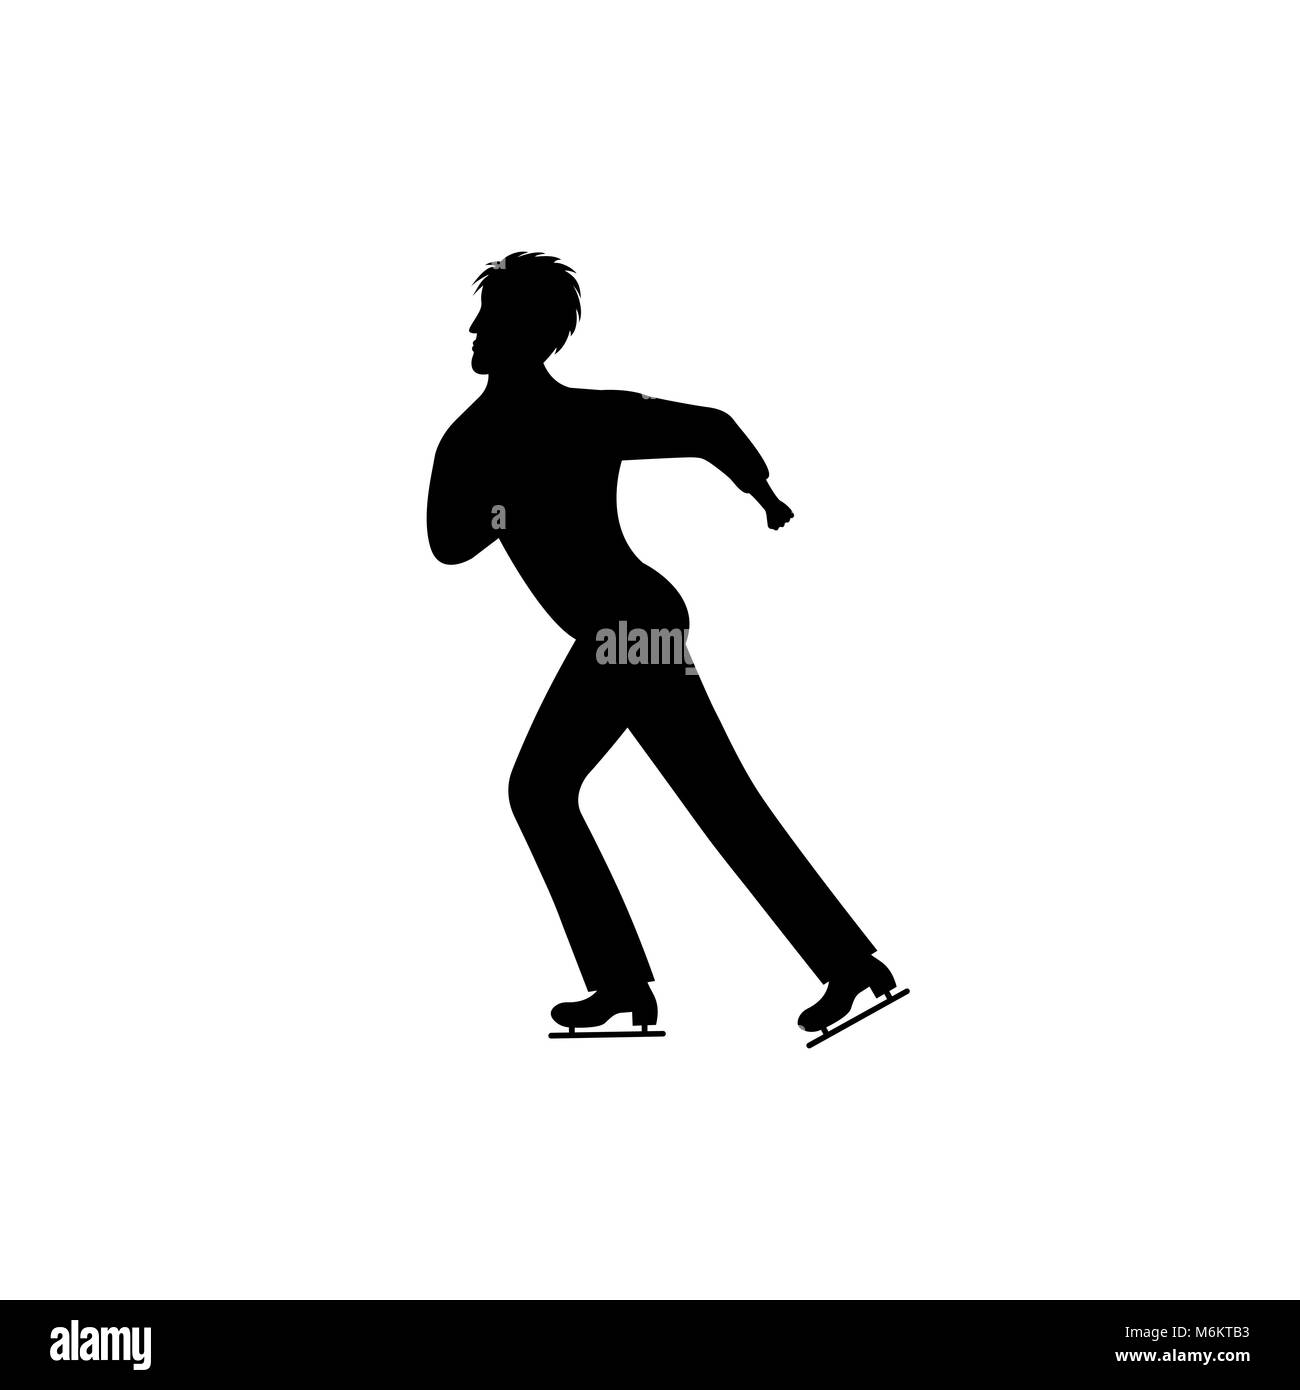 Men's figure skating. Isolated icon Stock Vector